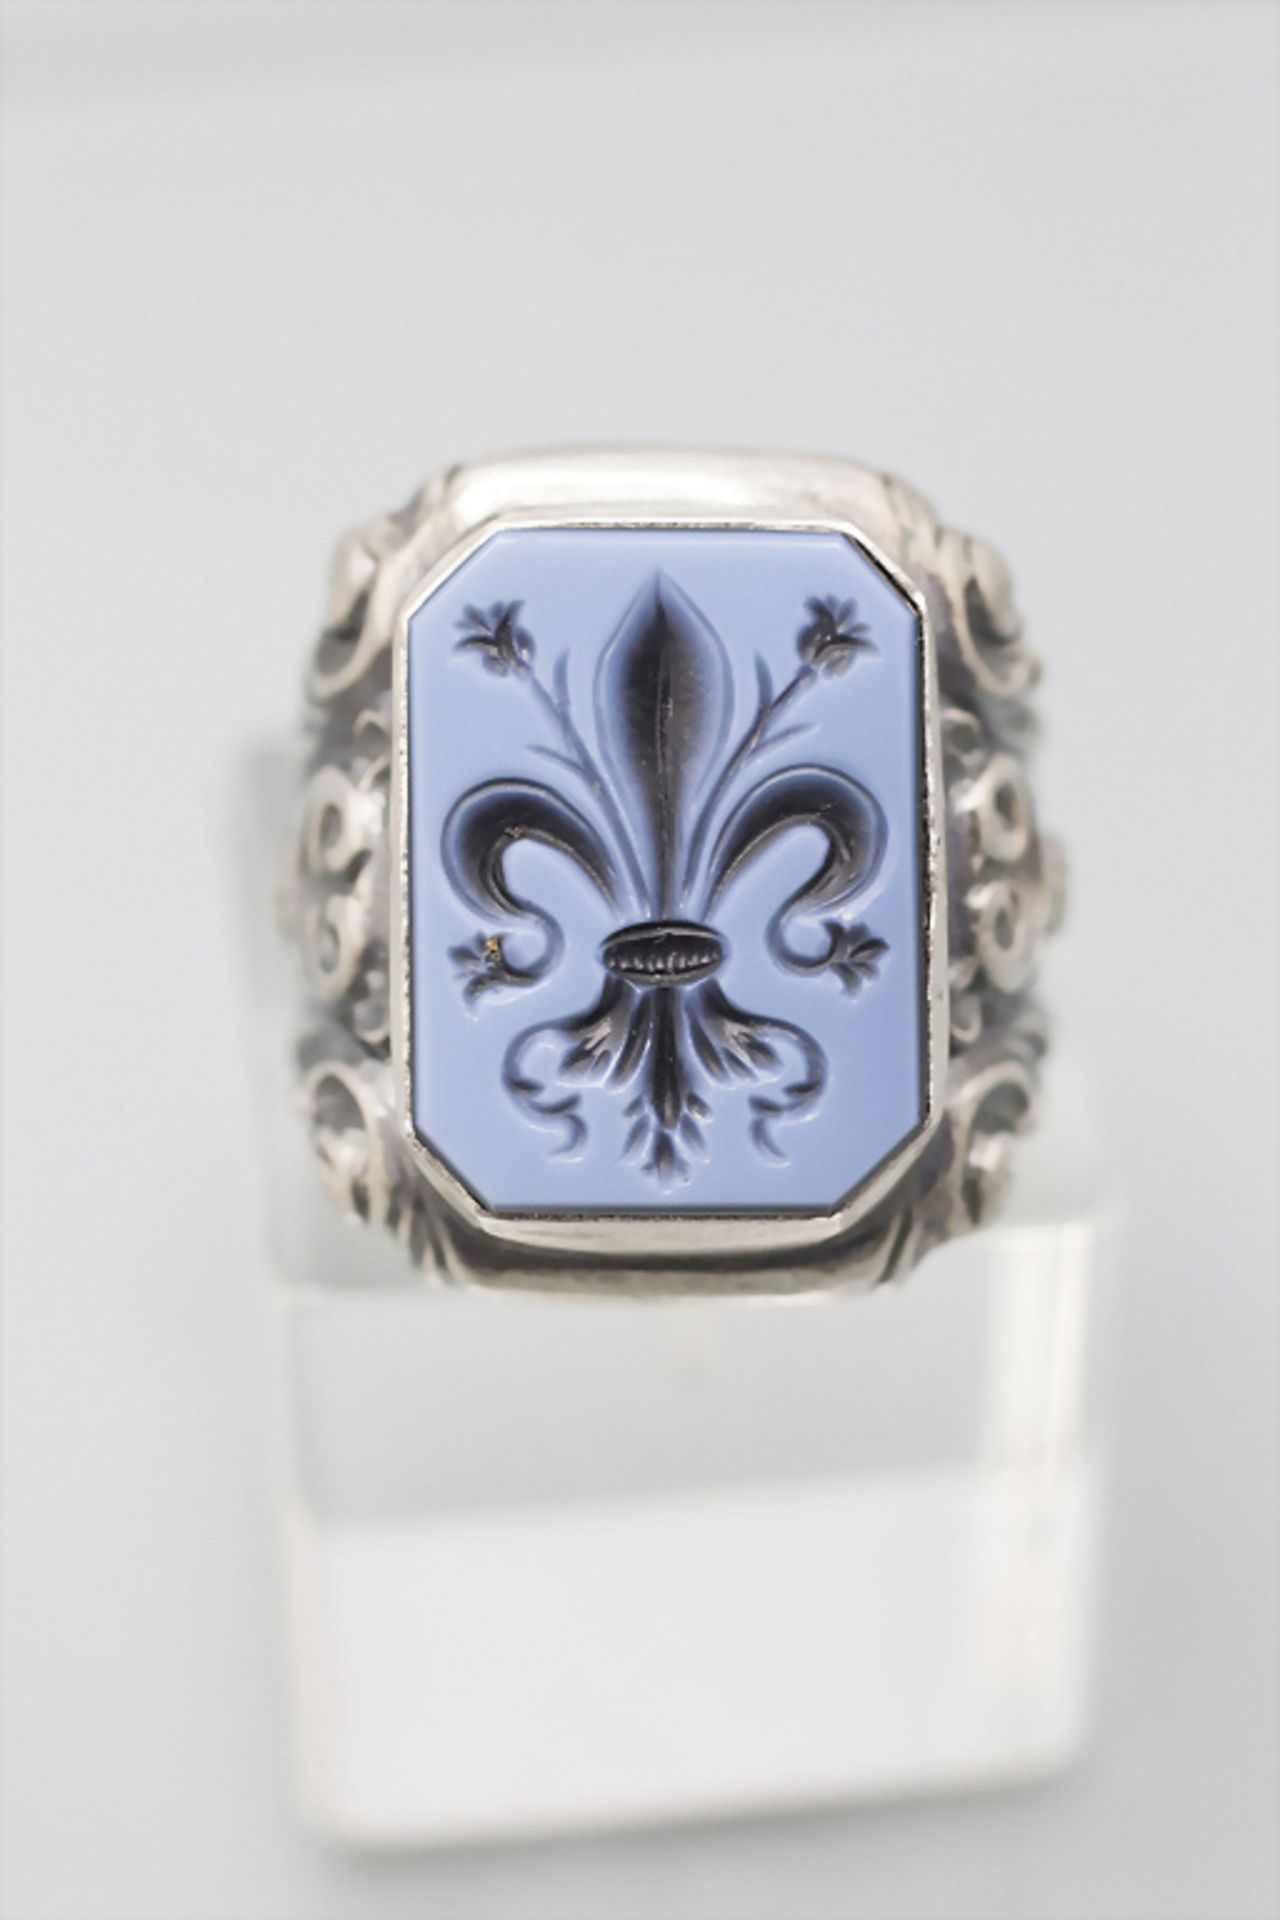 Siegelring / A silver seal ring, 20. Jh.